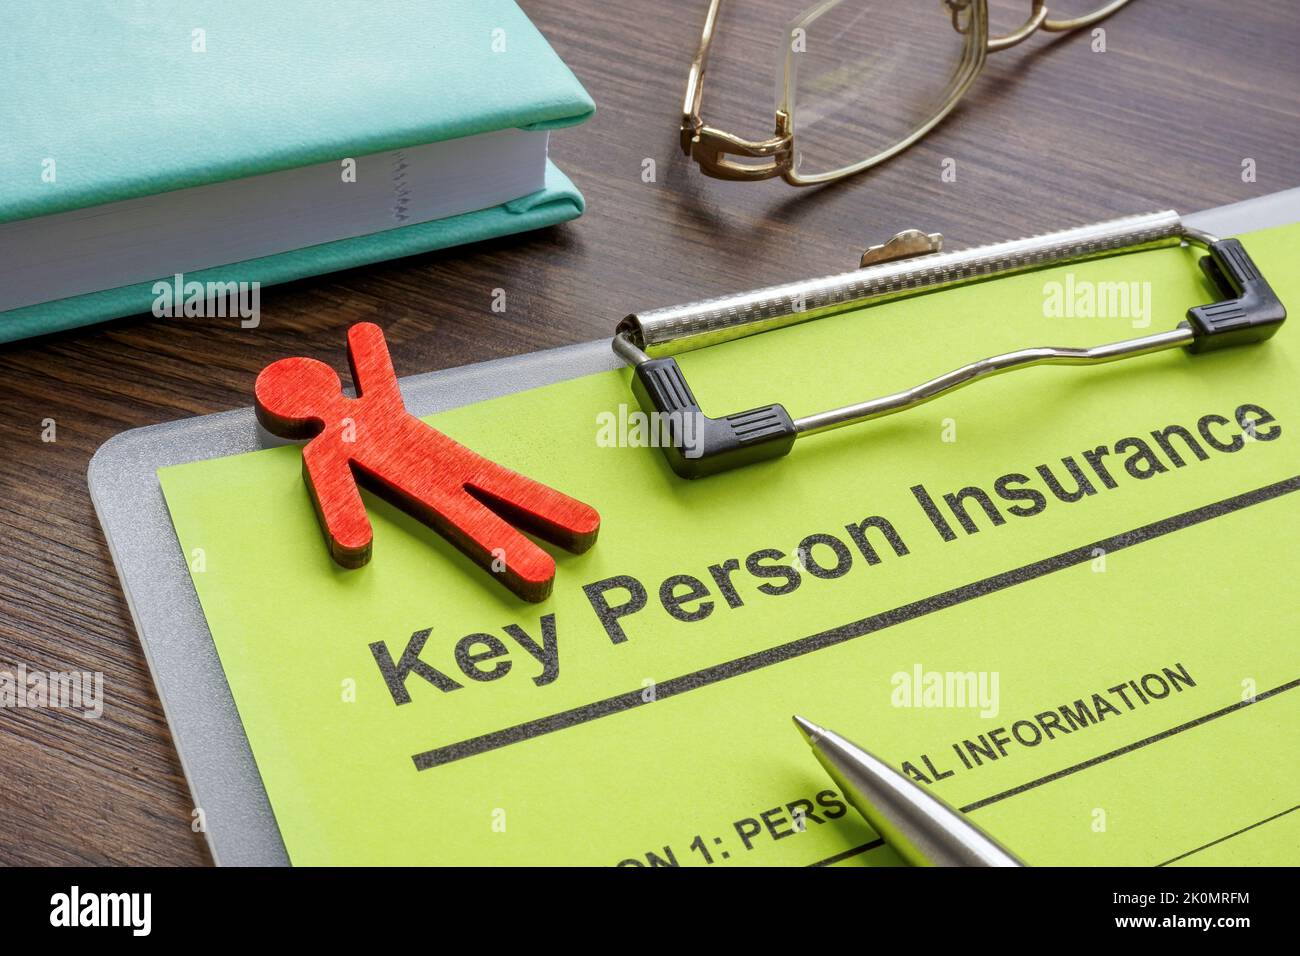 Key person insurance application and wooden figurine. Stock Photo